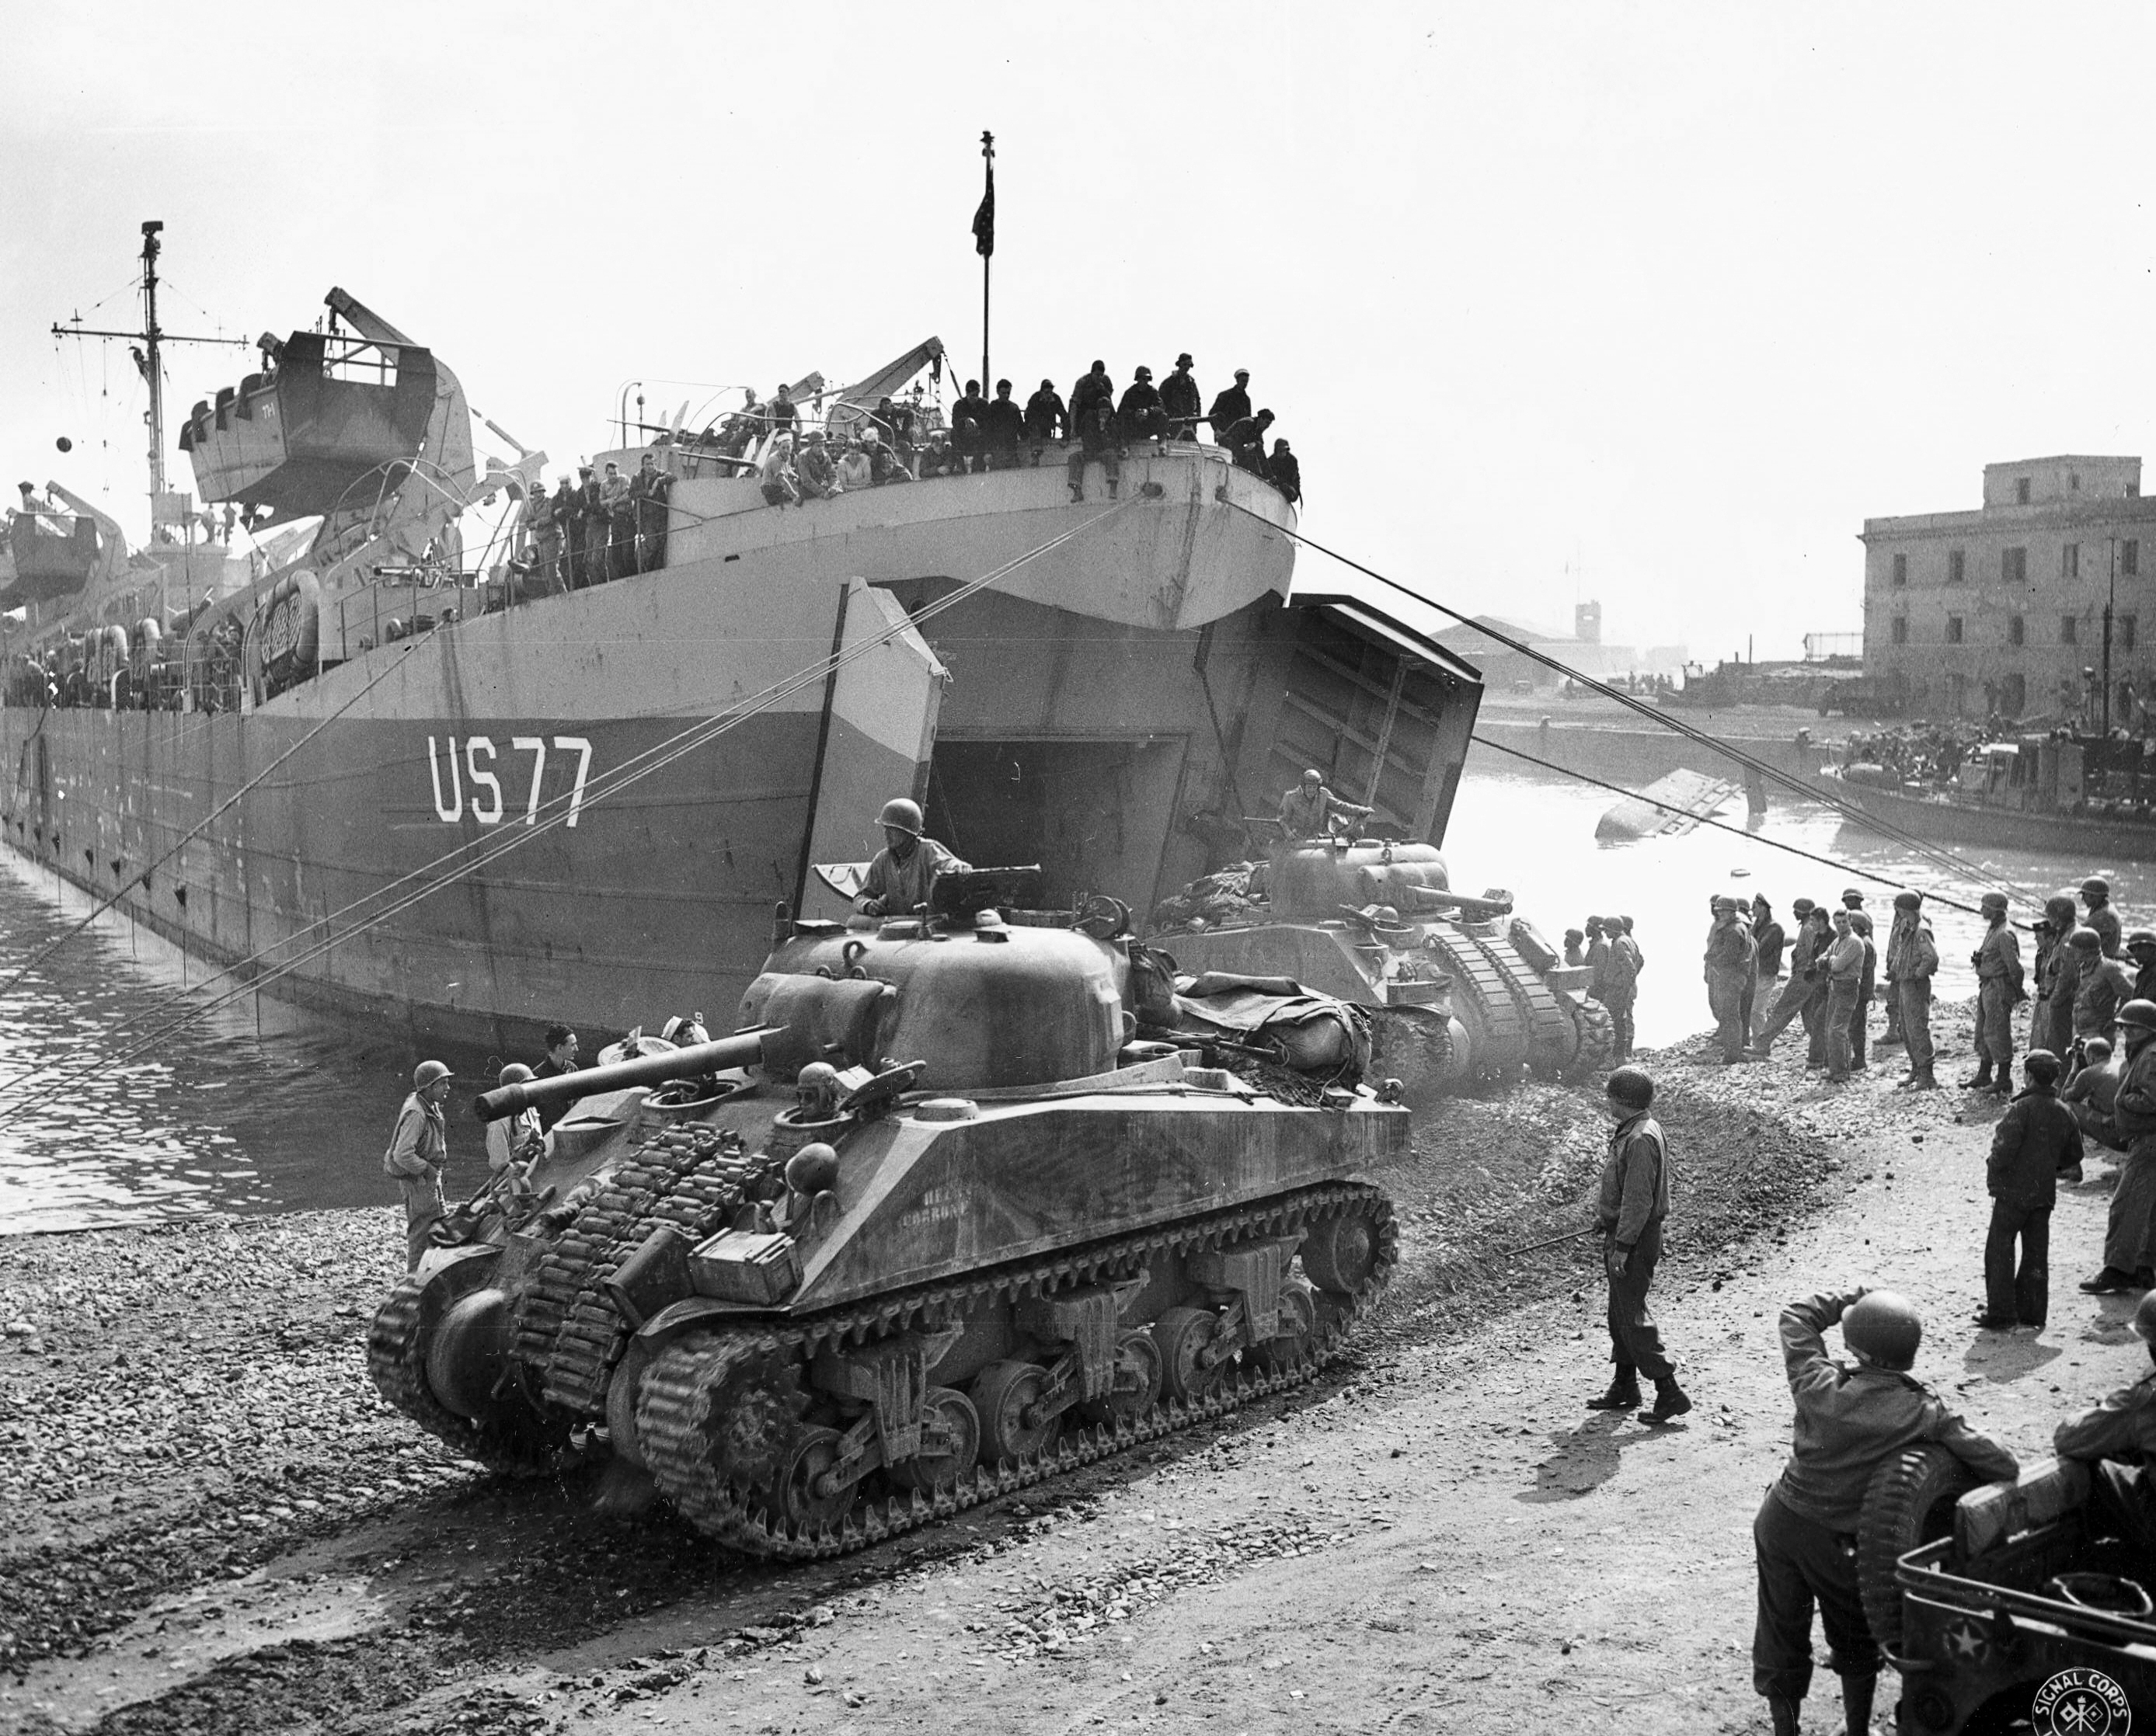 LST-77 off-loading M4 Sherman tanks at Anzio, Italy, May 1944; note the small barge capsized in the background and LCVP on the LST's davits